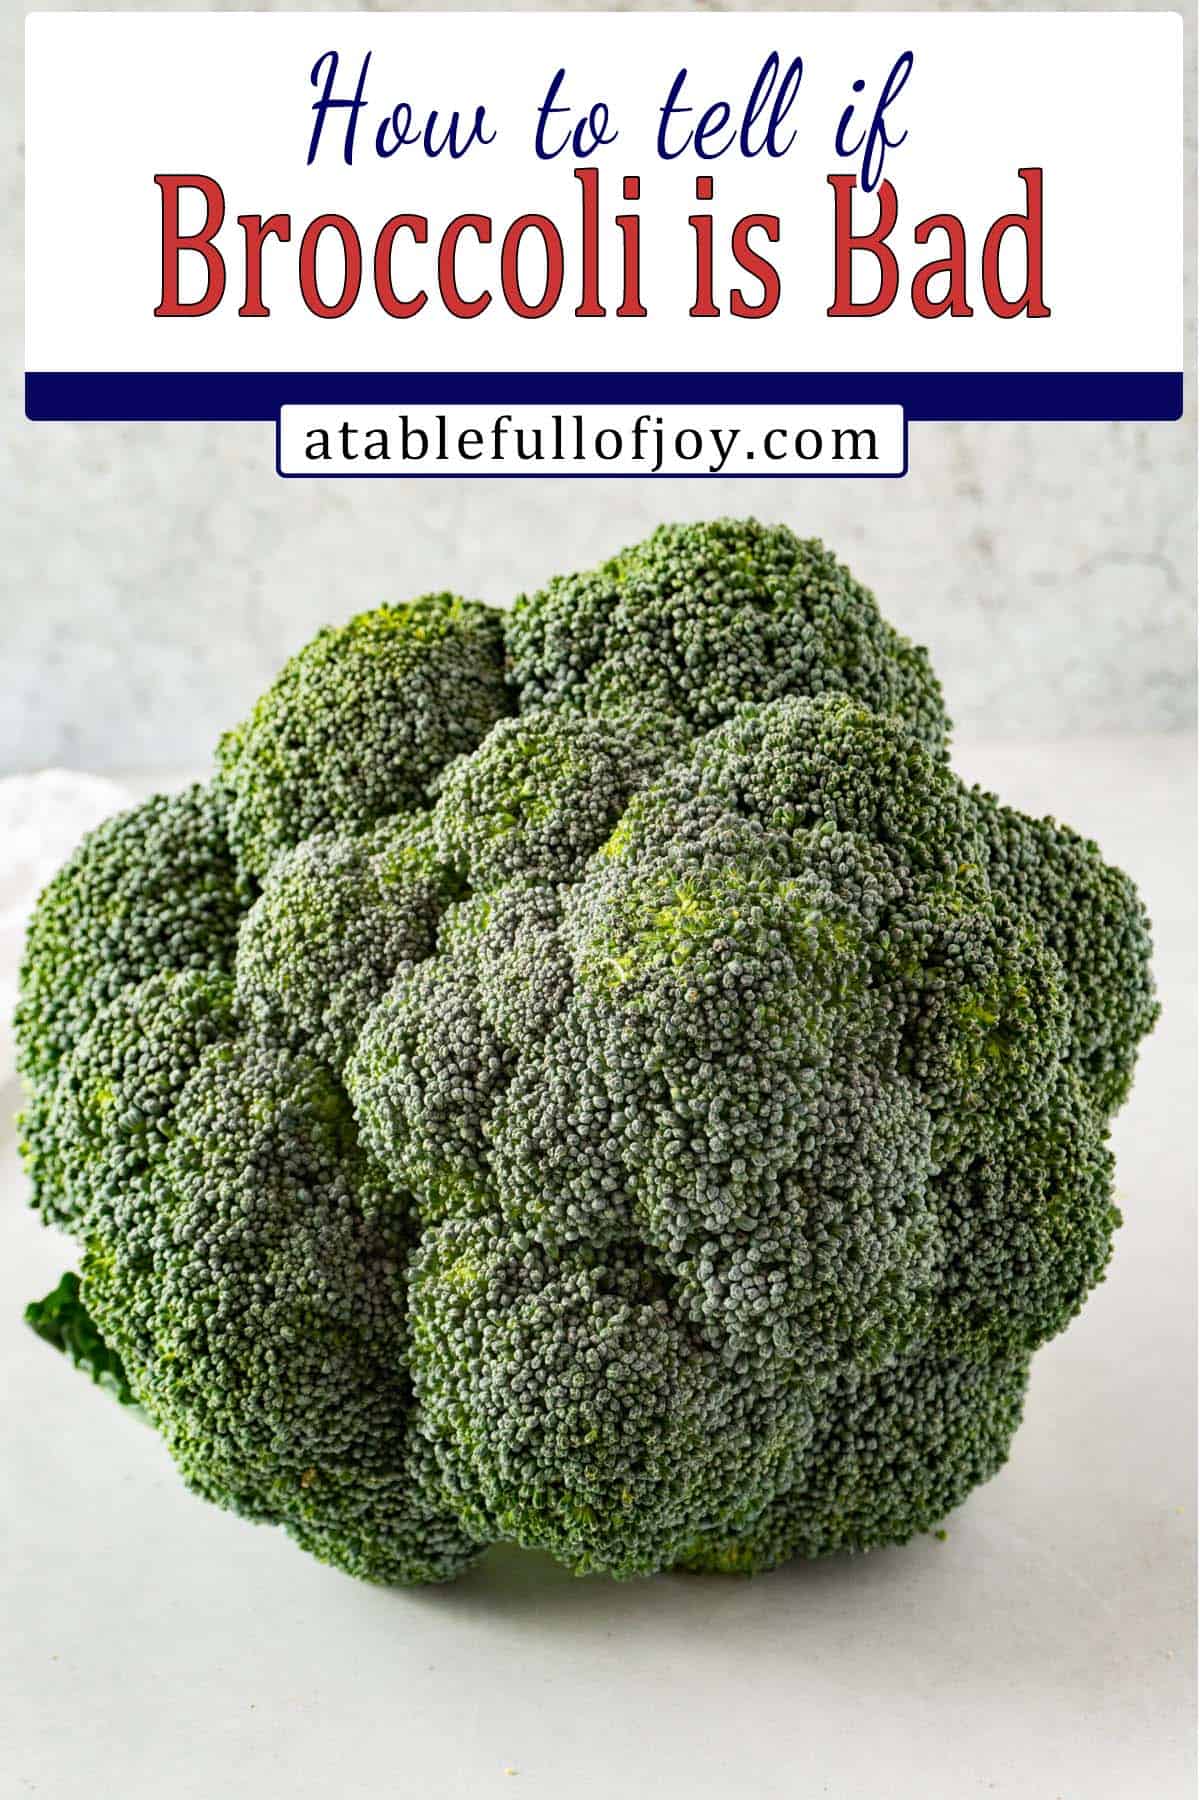 how to tell if broccoli is bad Pinterest pin